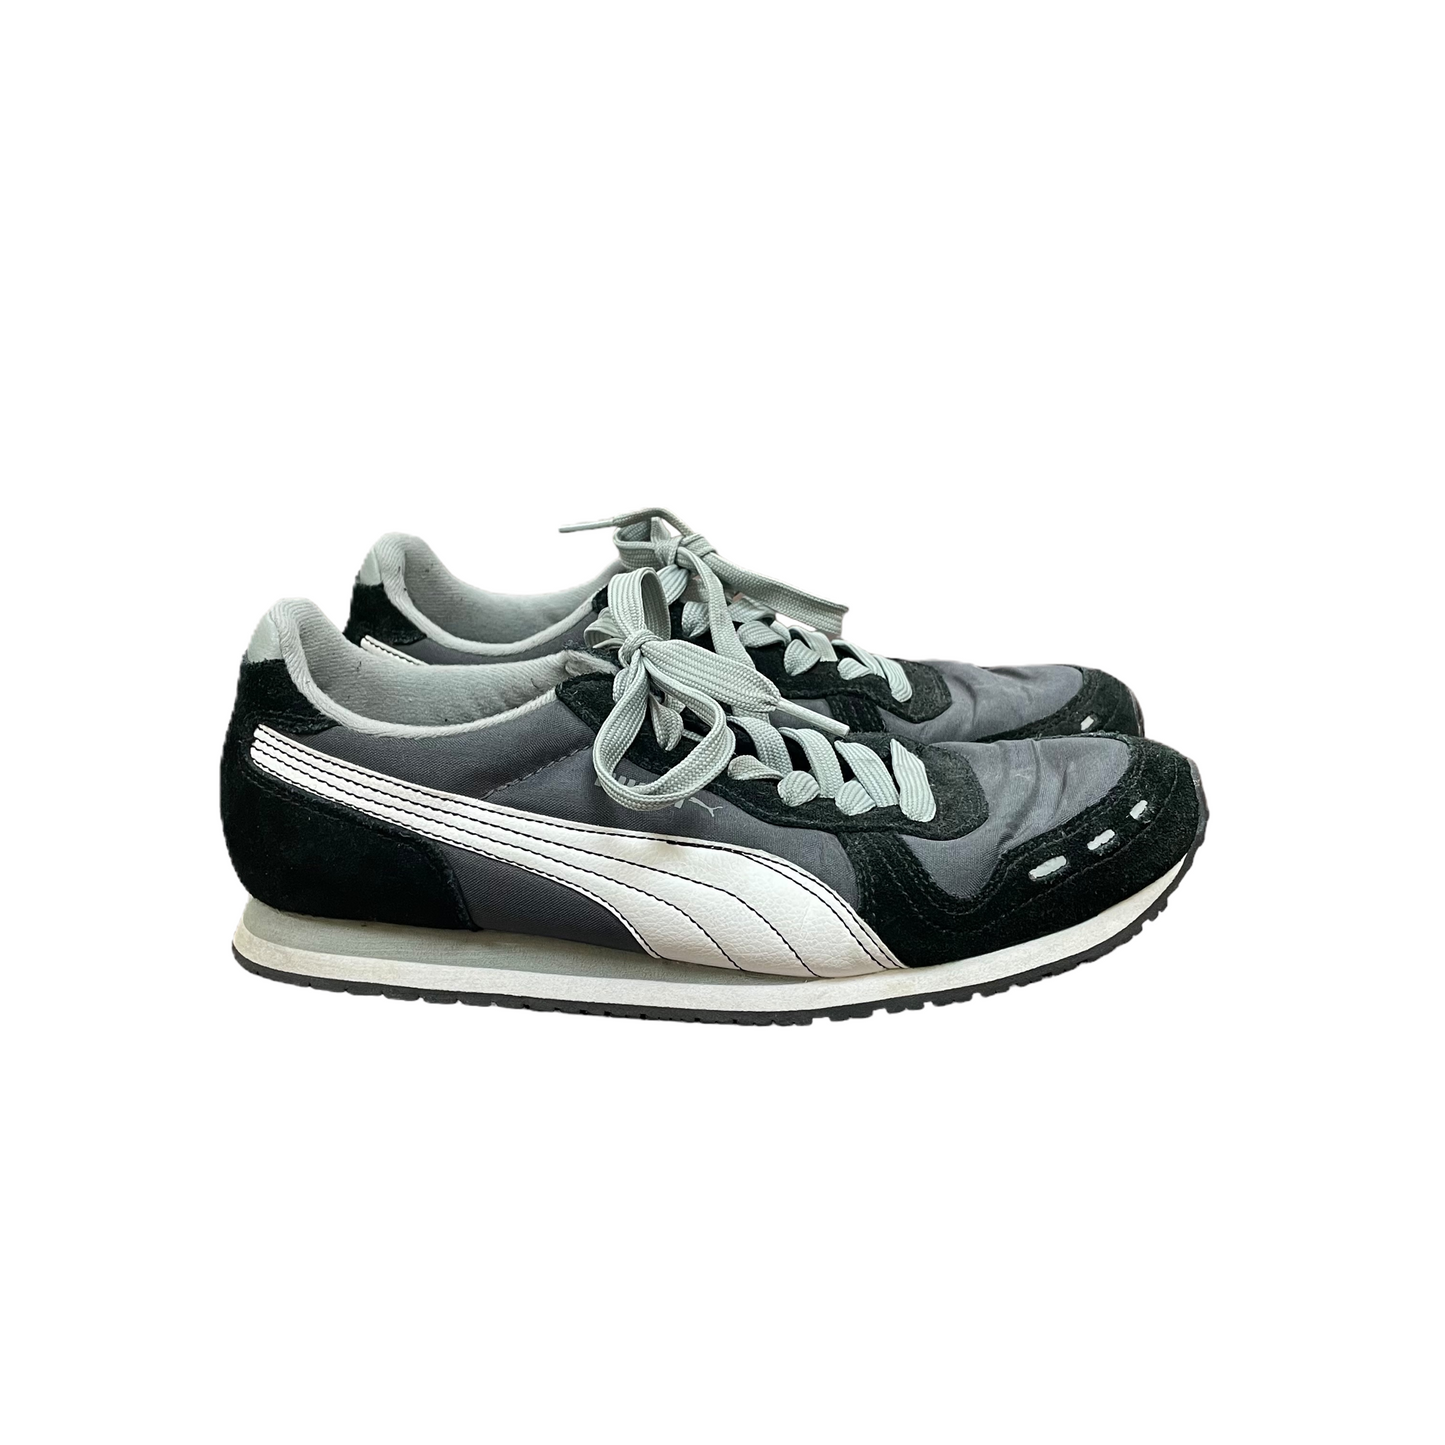 Black White Shoes Sneakers By Puma, Size: 5.5